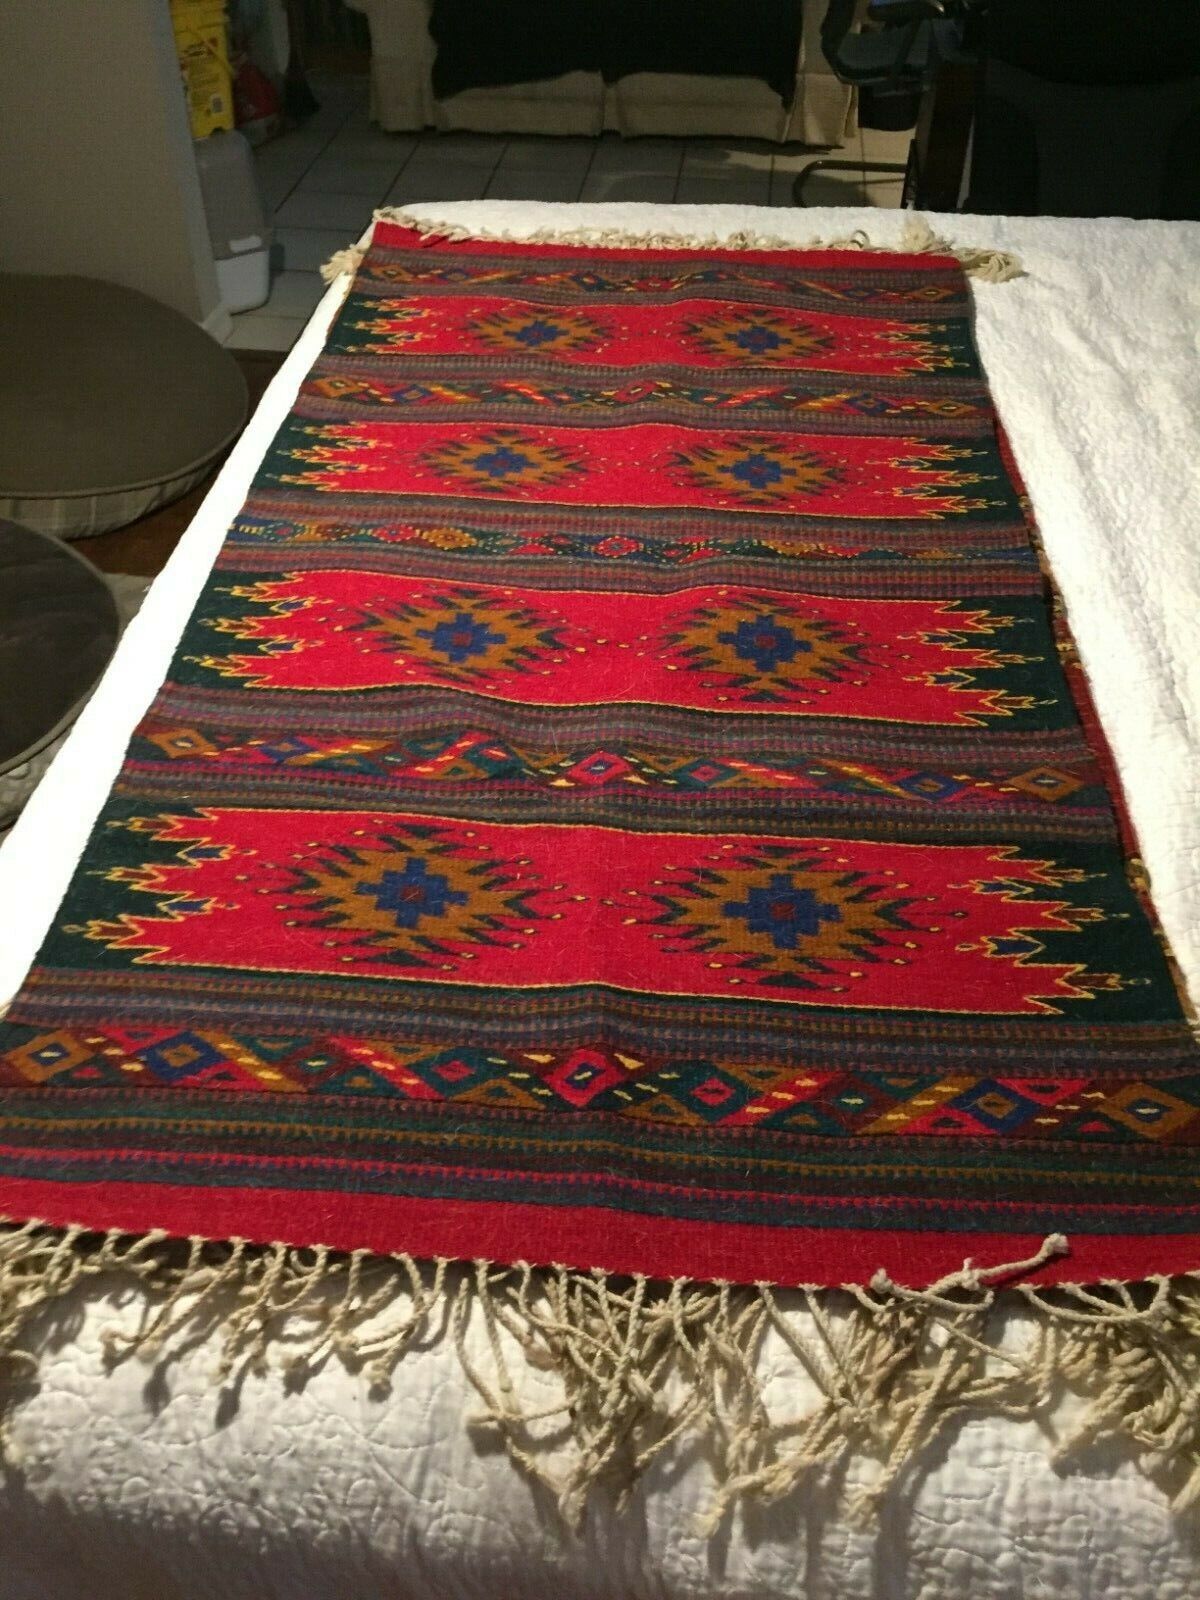 Indian Rugs great for hanging on walls.Beautiful colors